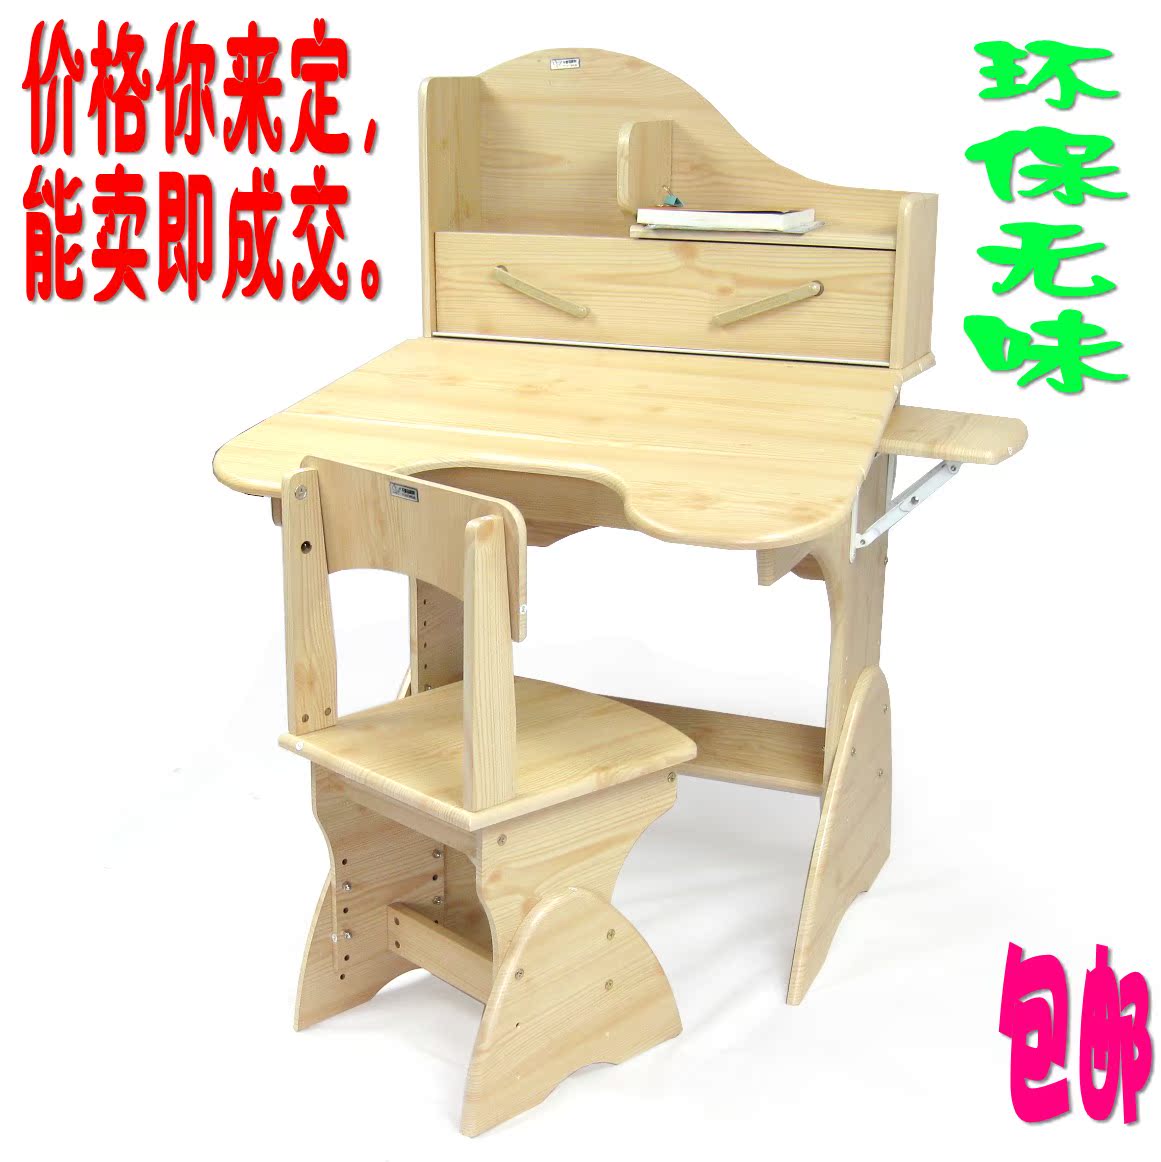 Krima Jun Ma No. 3 Lifting Children Study Table Elementary School Students Desk Writing Desk Desk And Chairs Special Price-Taobao